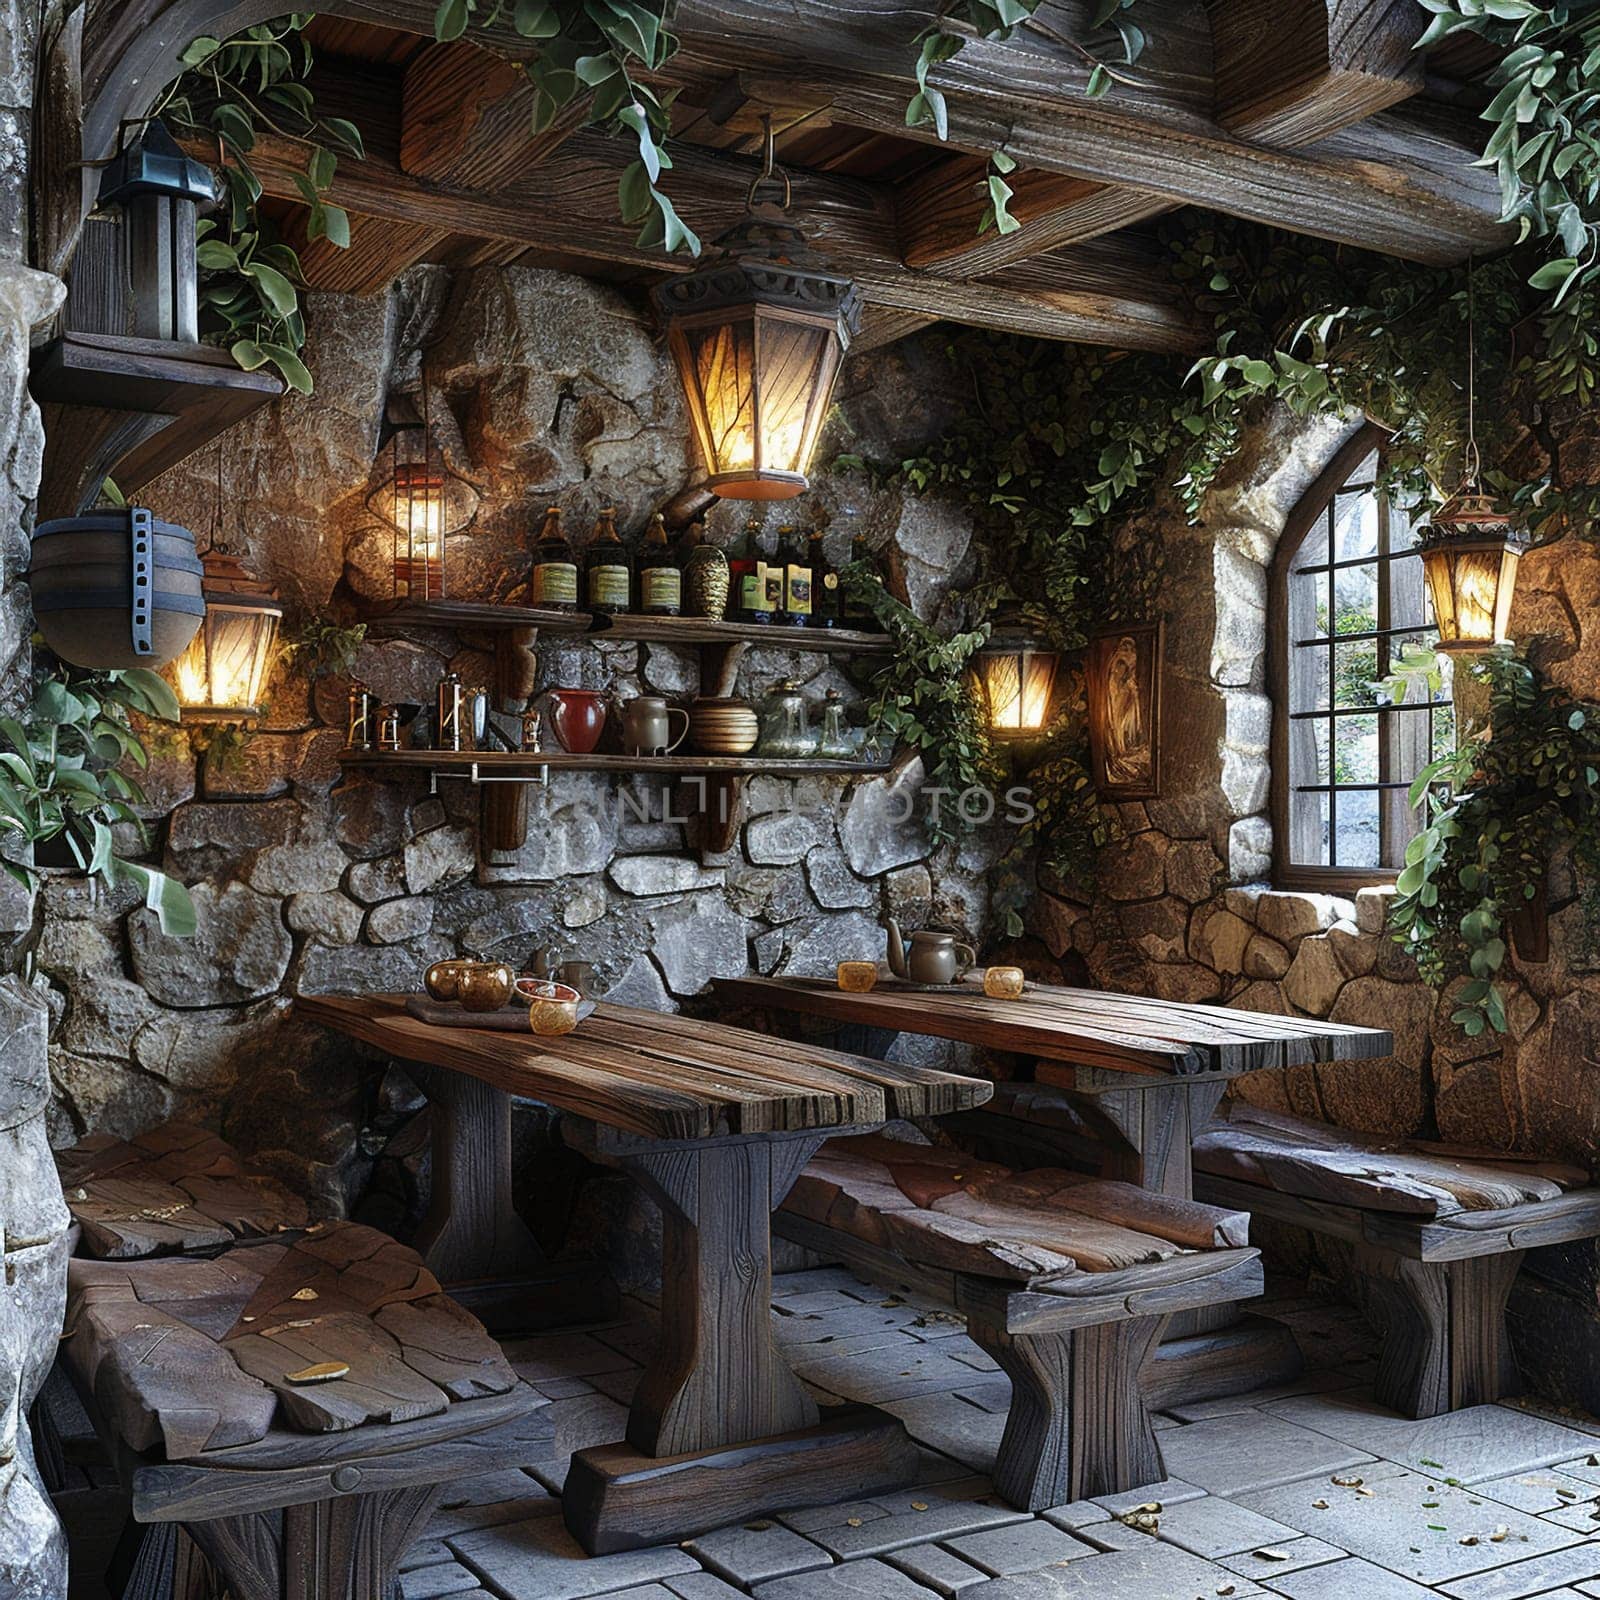 Medieval themed tavern with stone walls and heavy wooden tables3D render.